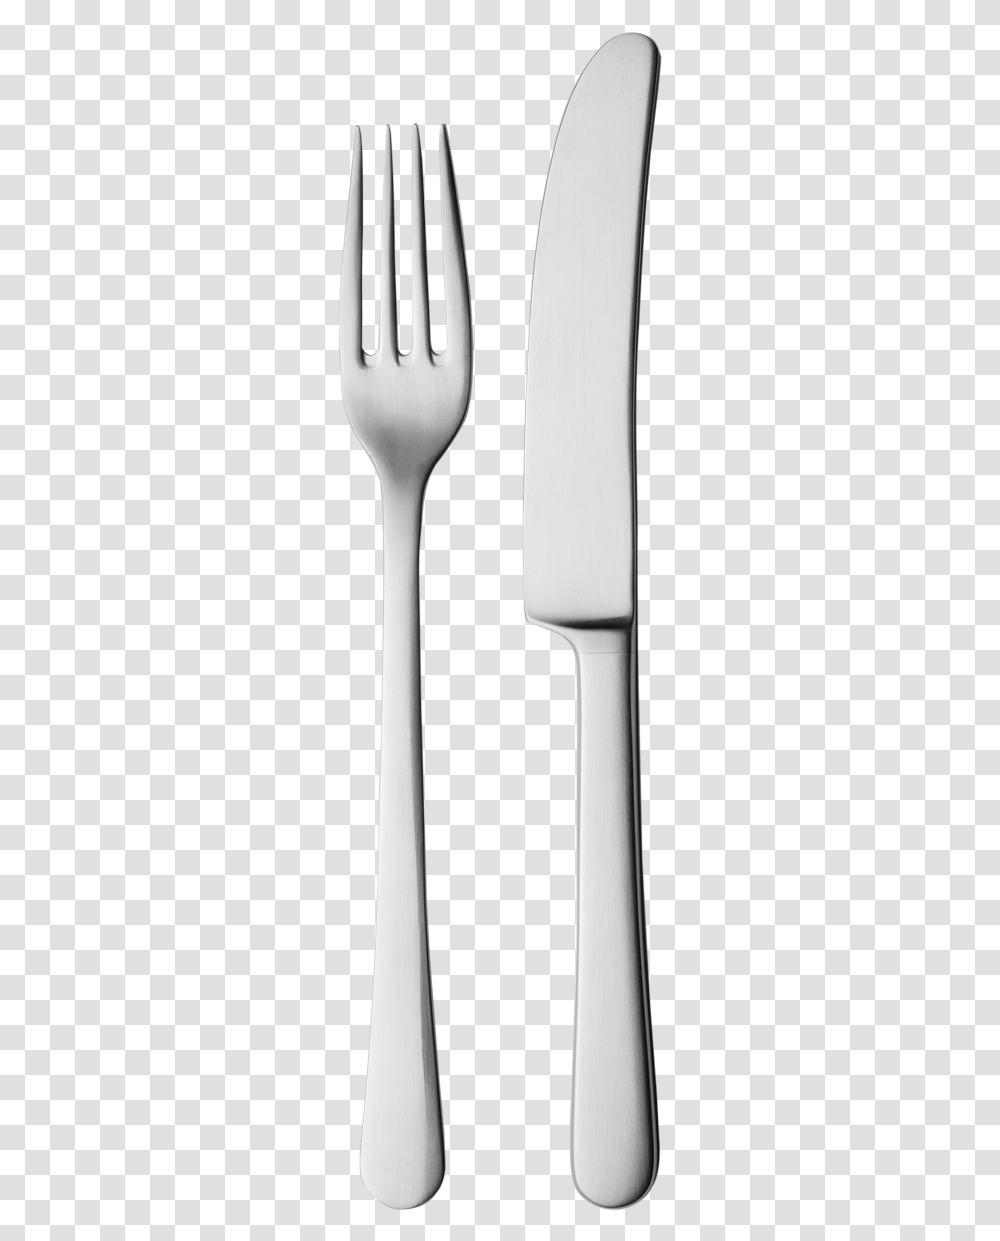 Forks Images Free Fork Picture Download Fork And Knife, Cutlery, Spoon, Dish, Meal Transparent Png